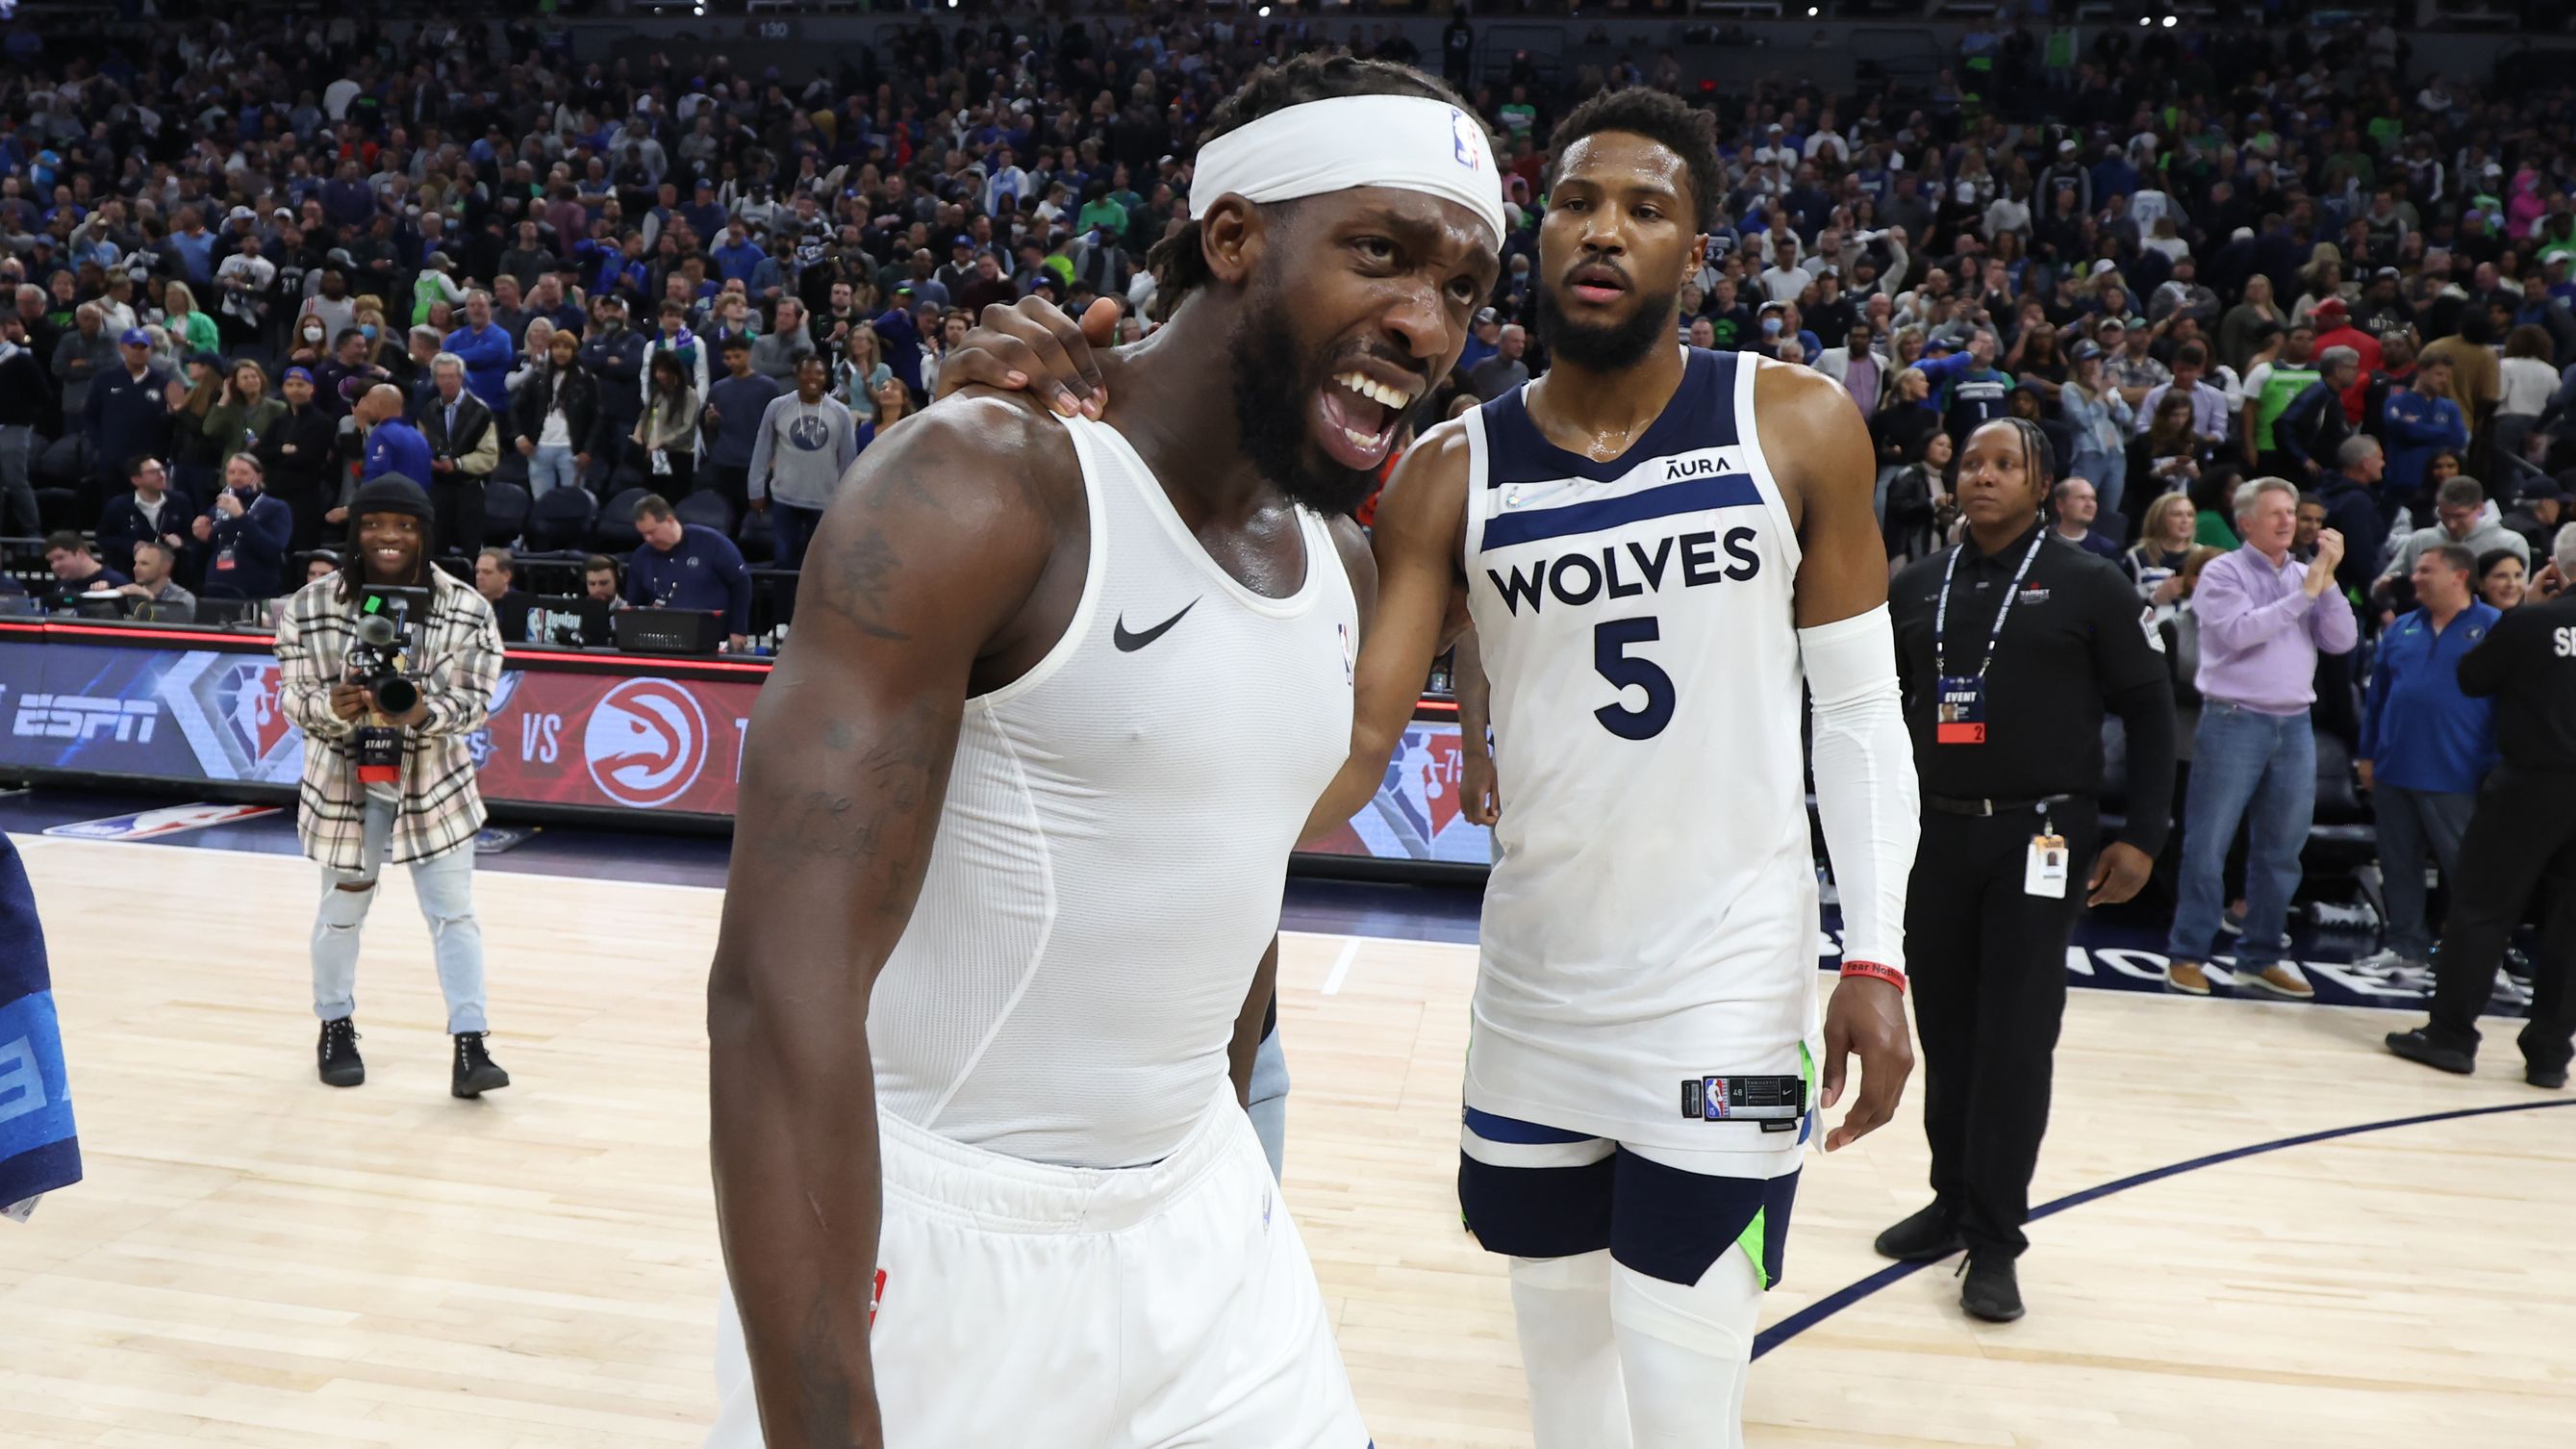 Patrick Beverley of the Minnesota Timberwolves celebrates winning the game against the LA Clippers.